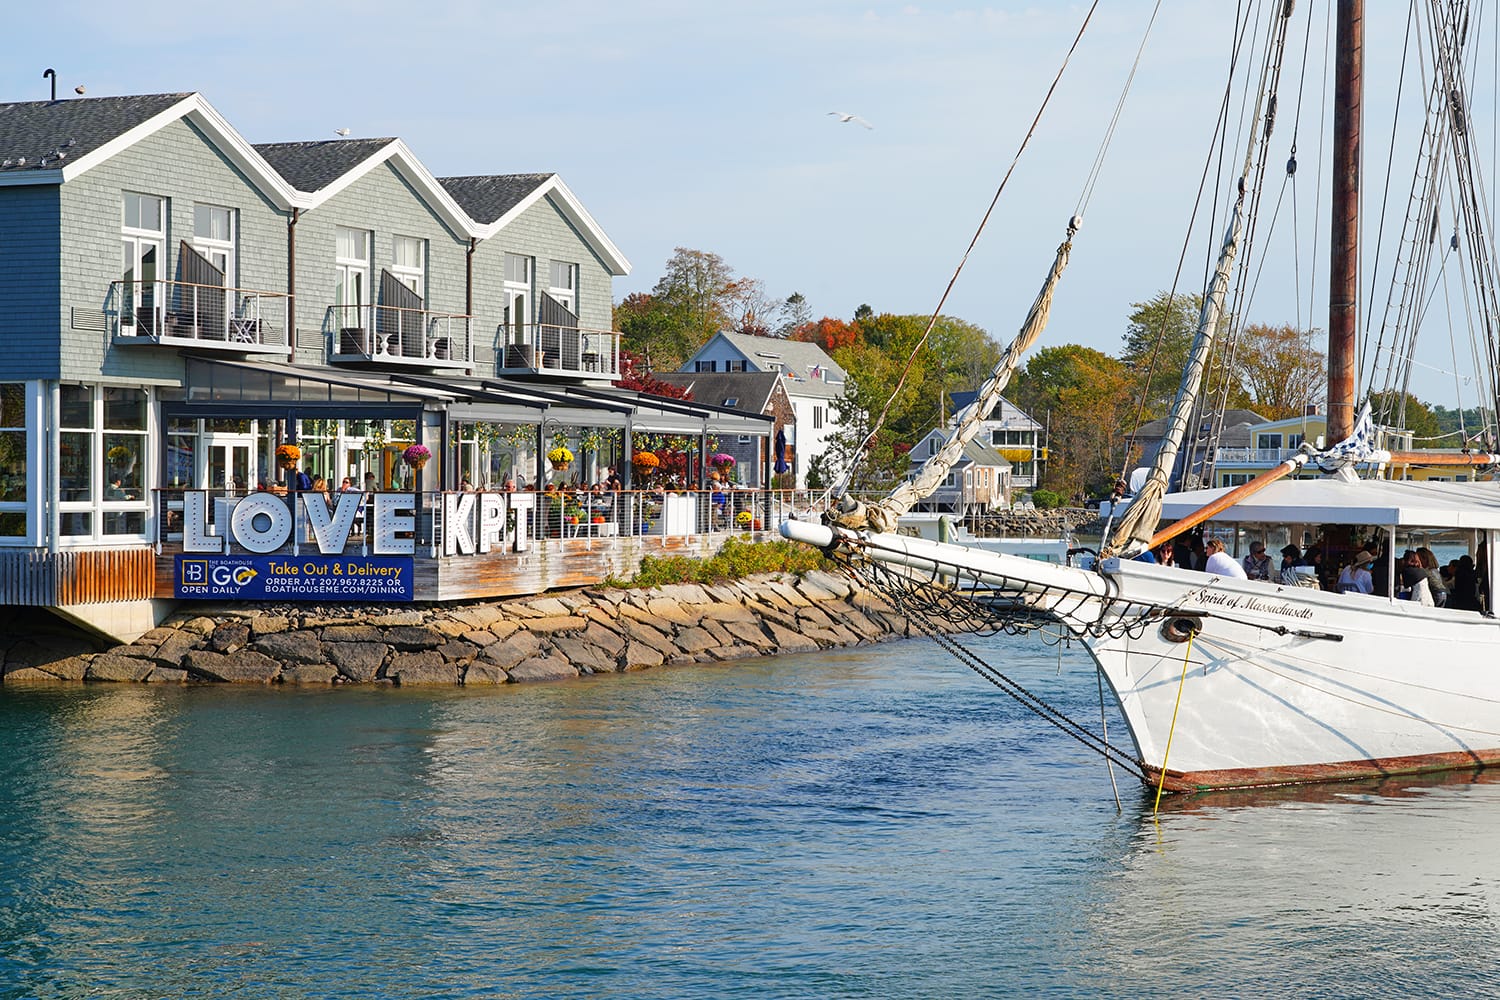 Kennebunkport, a coastal town in York County, Maine, United States, home of the Bush family.